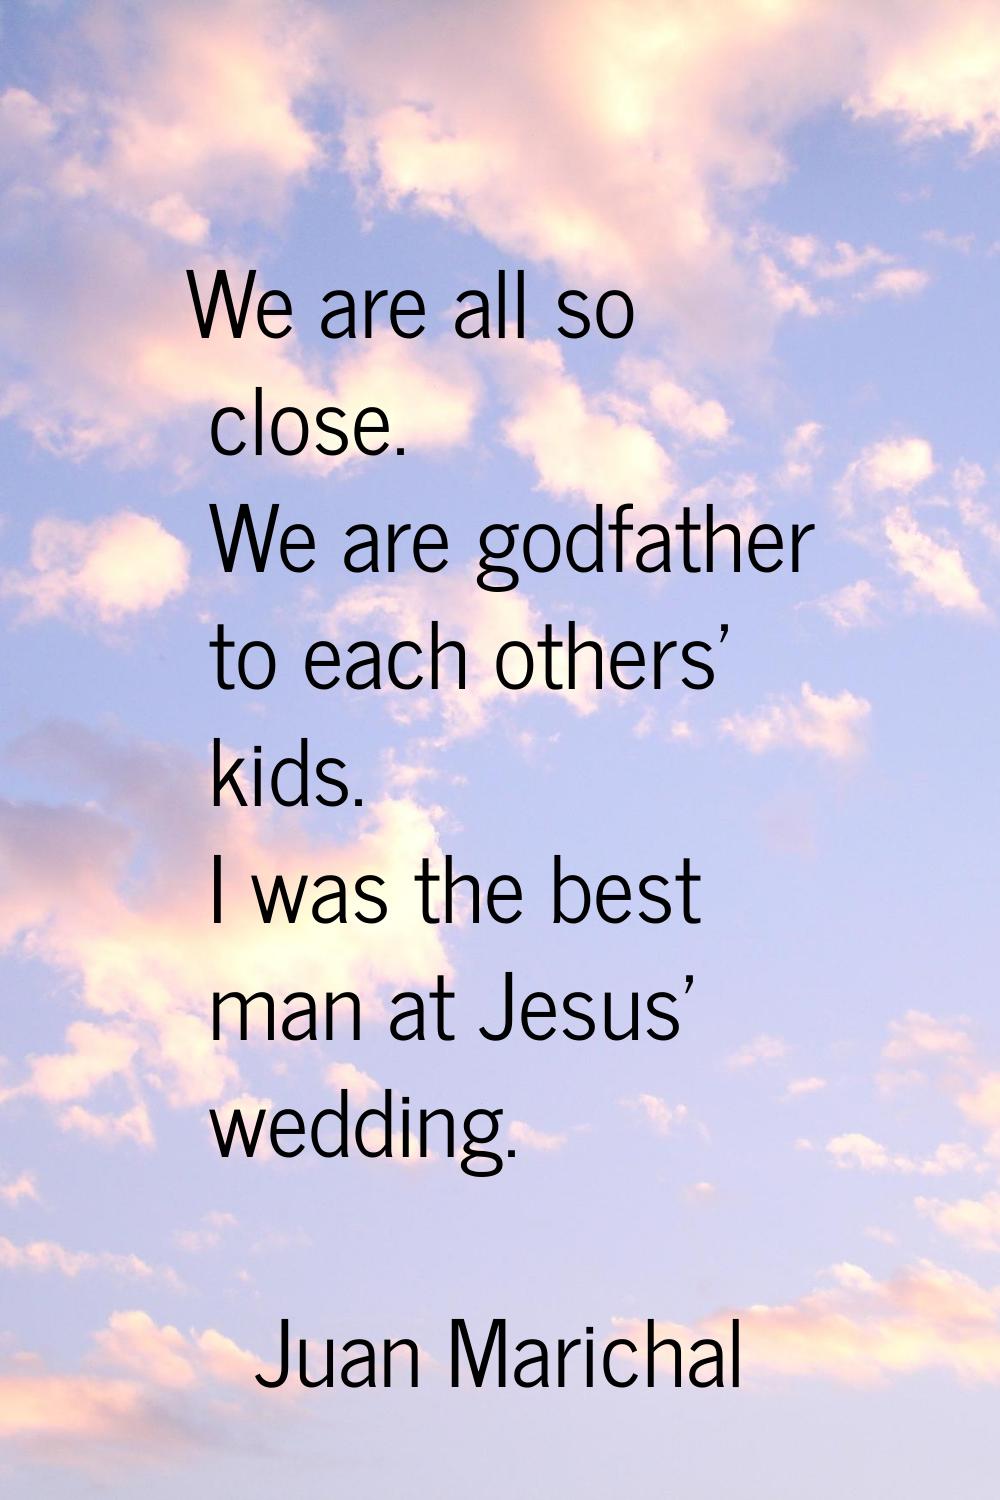 We are all so close. We are godfather to each others' kids. I was the best man at Jesus' wedding.